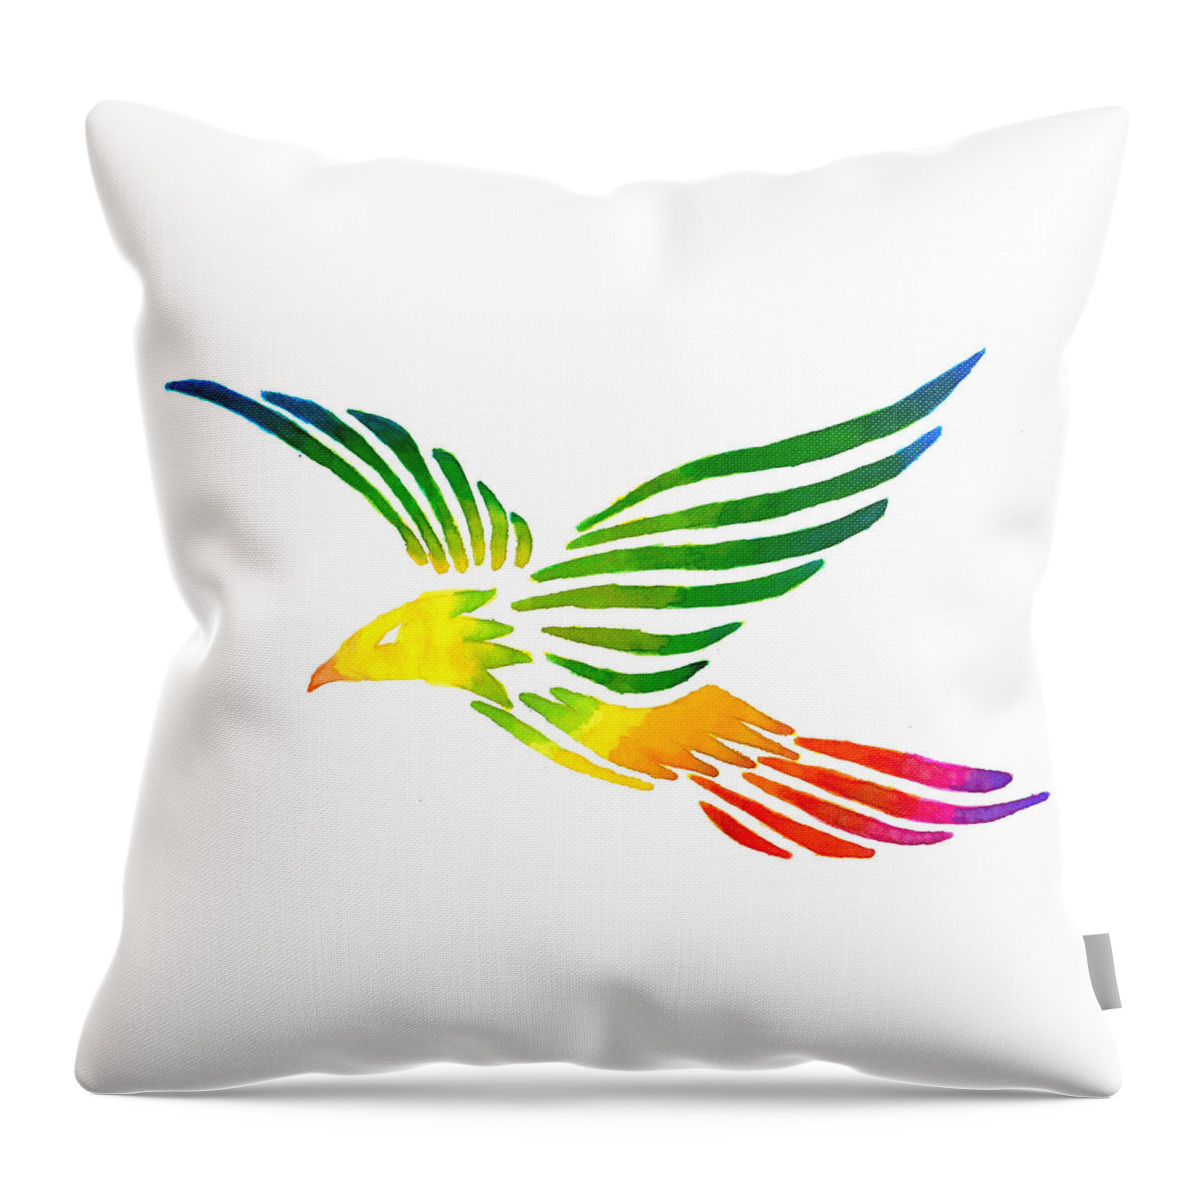 Multicolored Throw Pillow featuring the painting Bird by Sarah Krafft